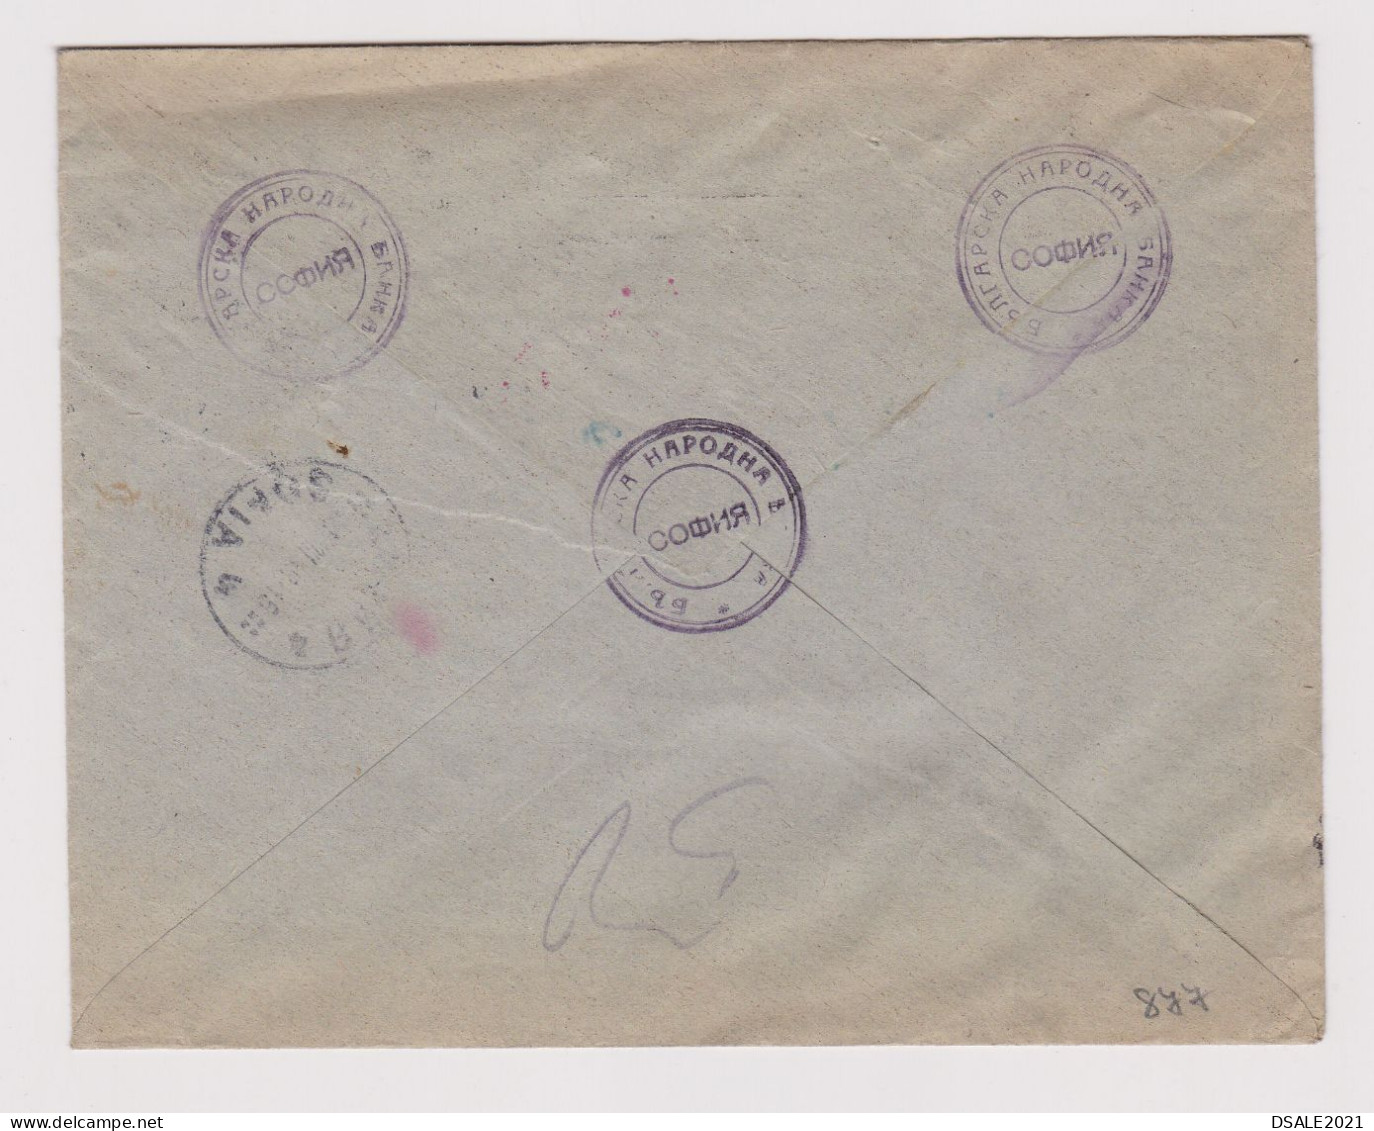 Bulgaria Bulgarien 1940s Registered Bank Cover With Perfin, Topic Stamps, Domestic Used Rare (877) - Cartas & Documentos